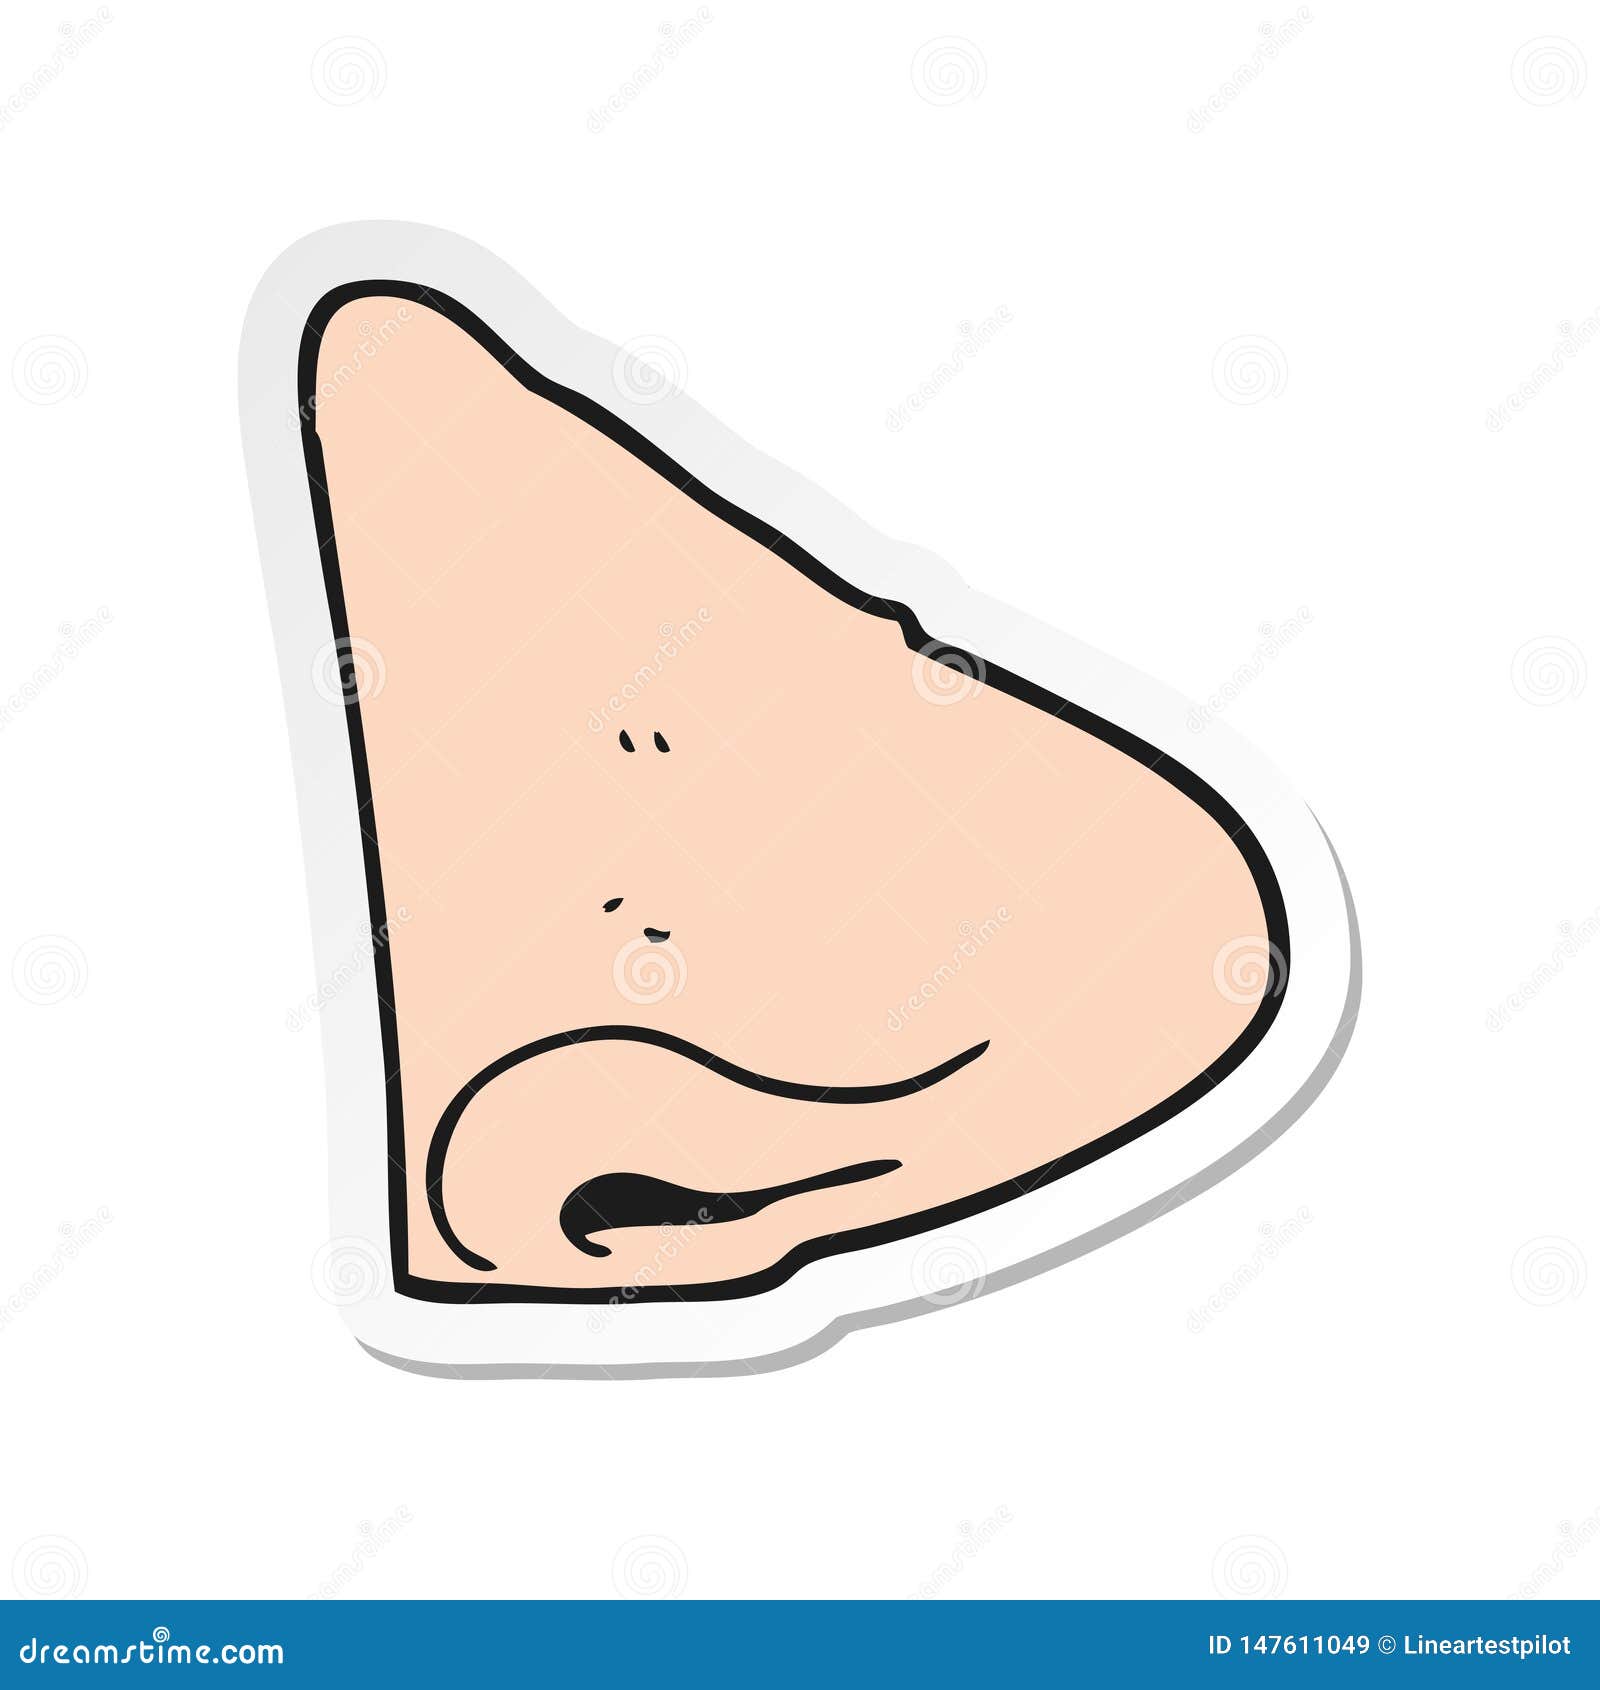 Sticker Of A Cartoon Nose Stock Vector Illustration Of Drawing 147611049